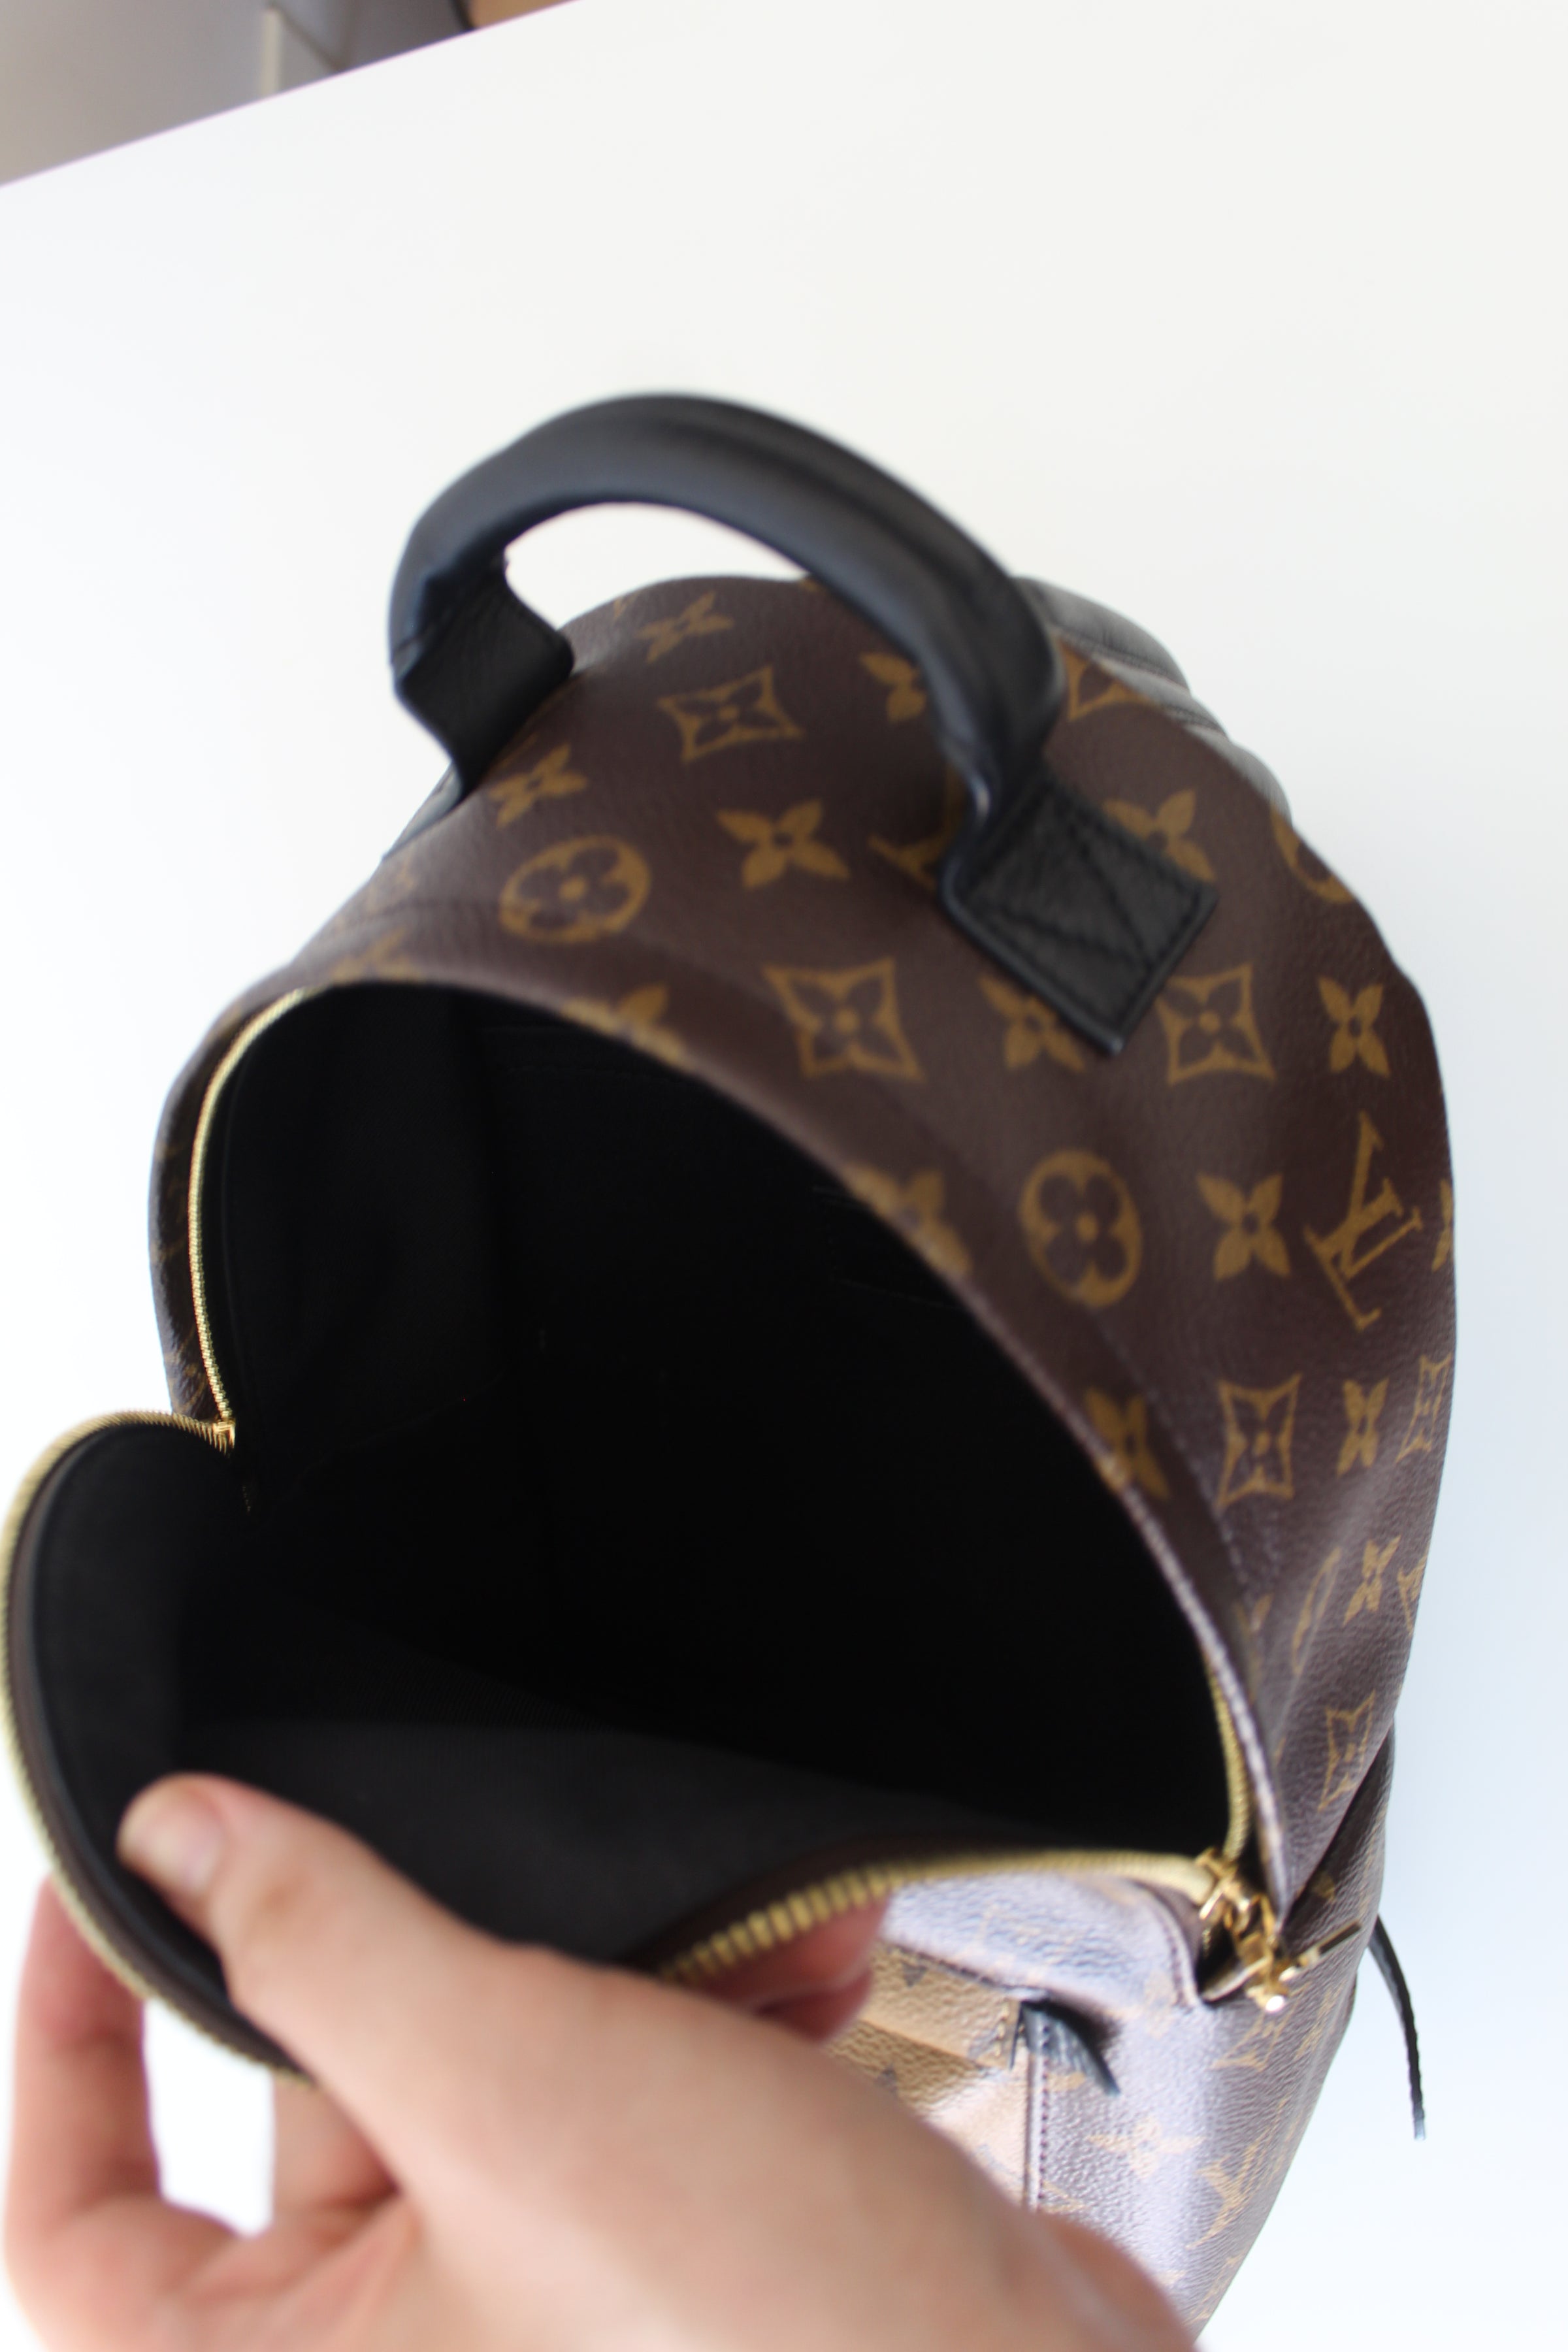 Louis Vuitton Backpack Mini - 33 For Sale on 1stDibs